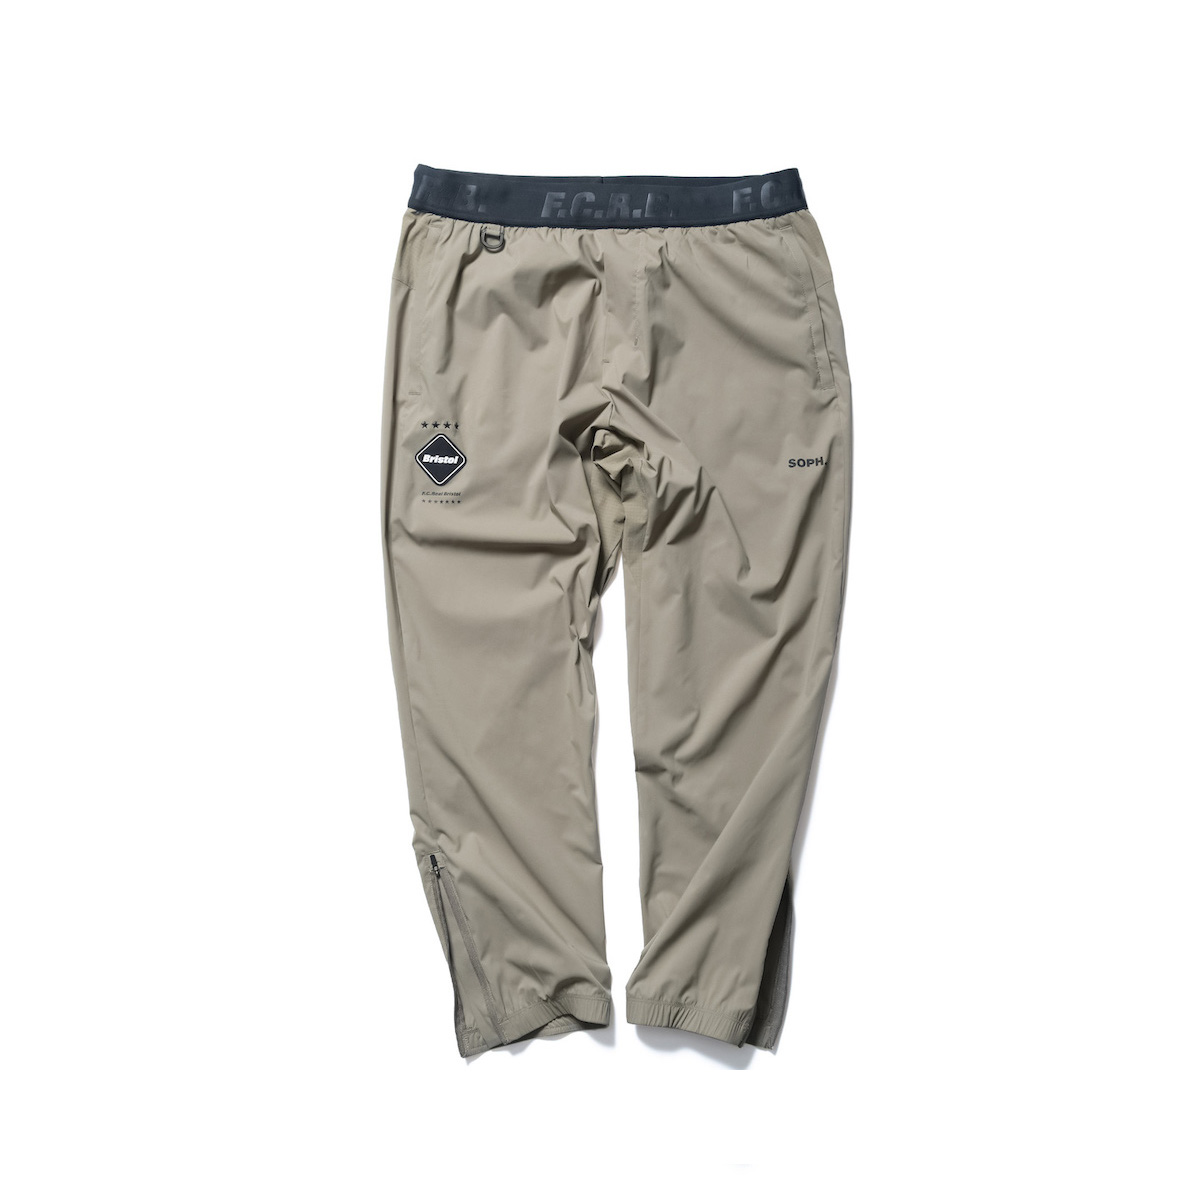 F.C.Real Bristol / STRETCH LIGHT WEIGHT JOGGER PANTS (Beige)